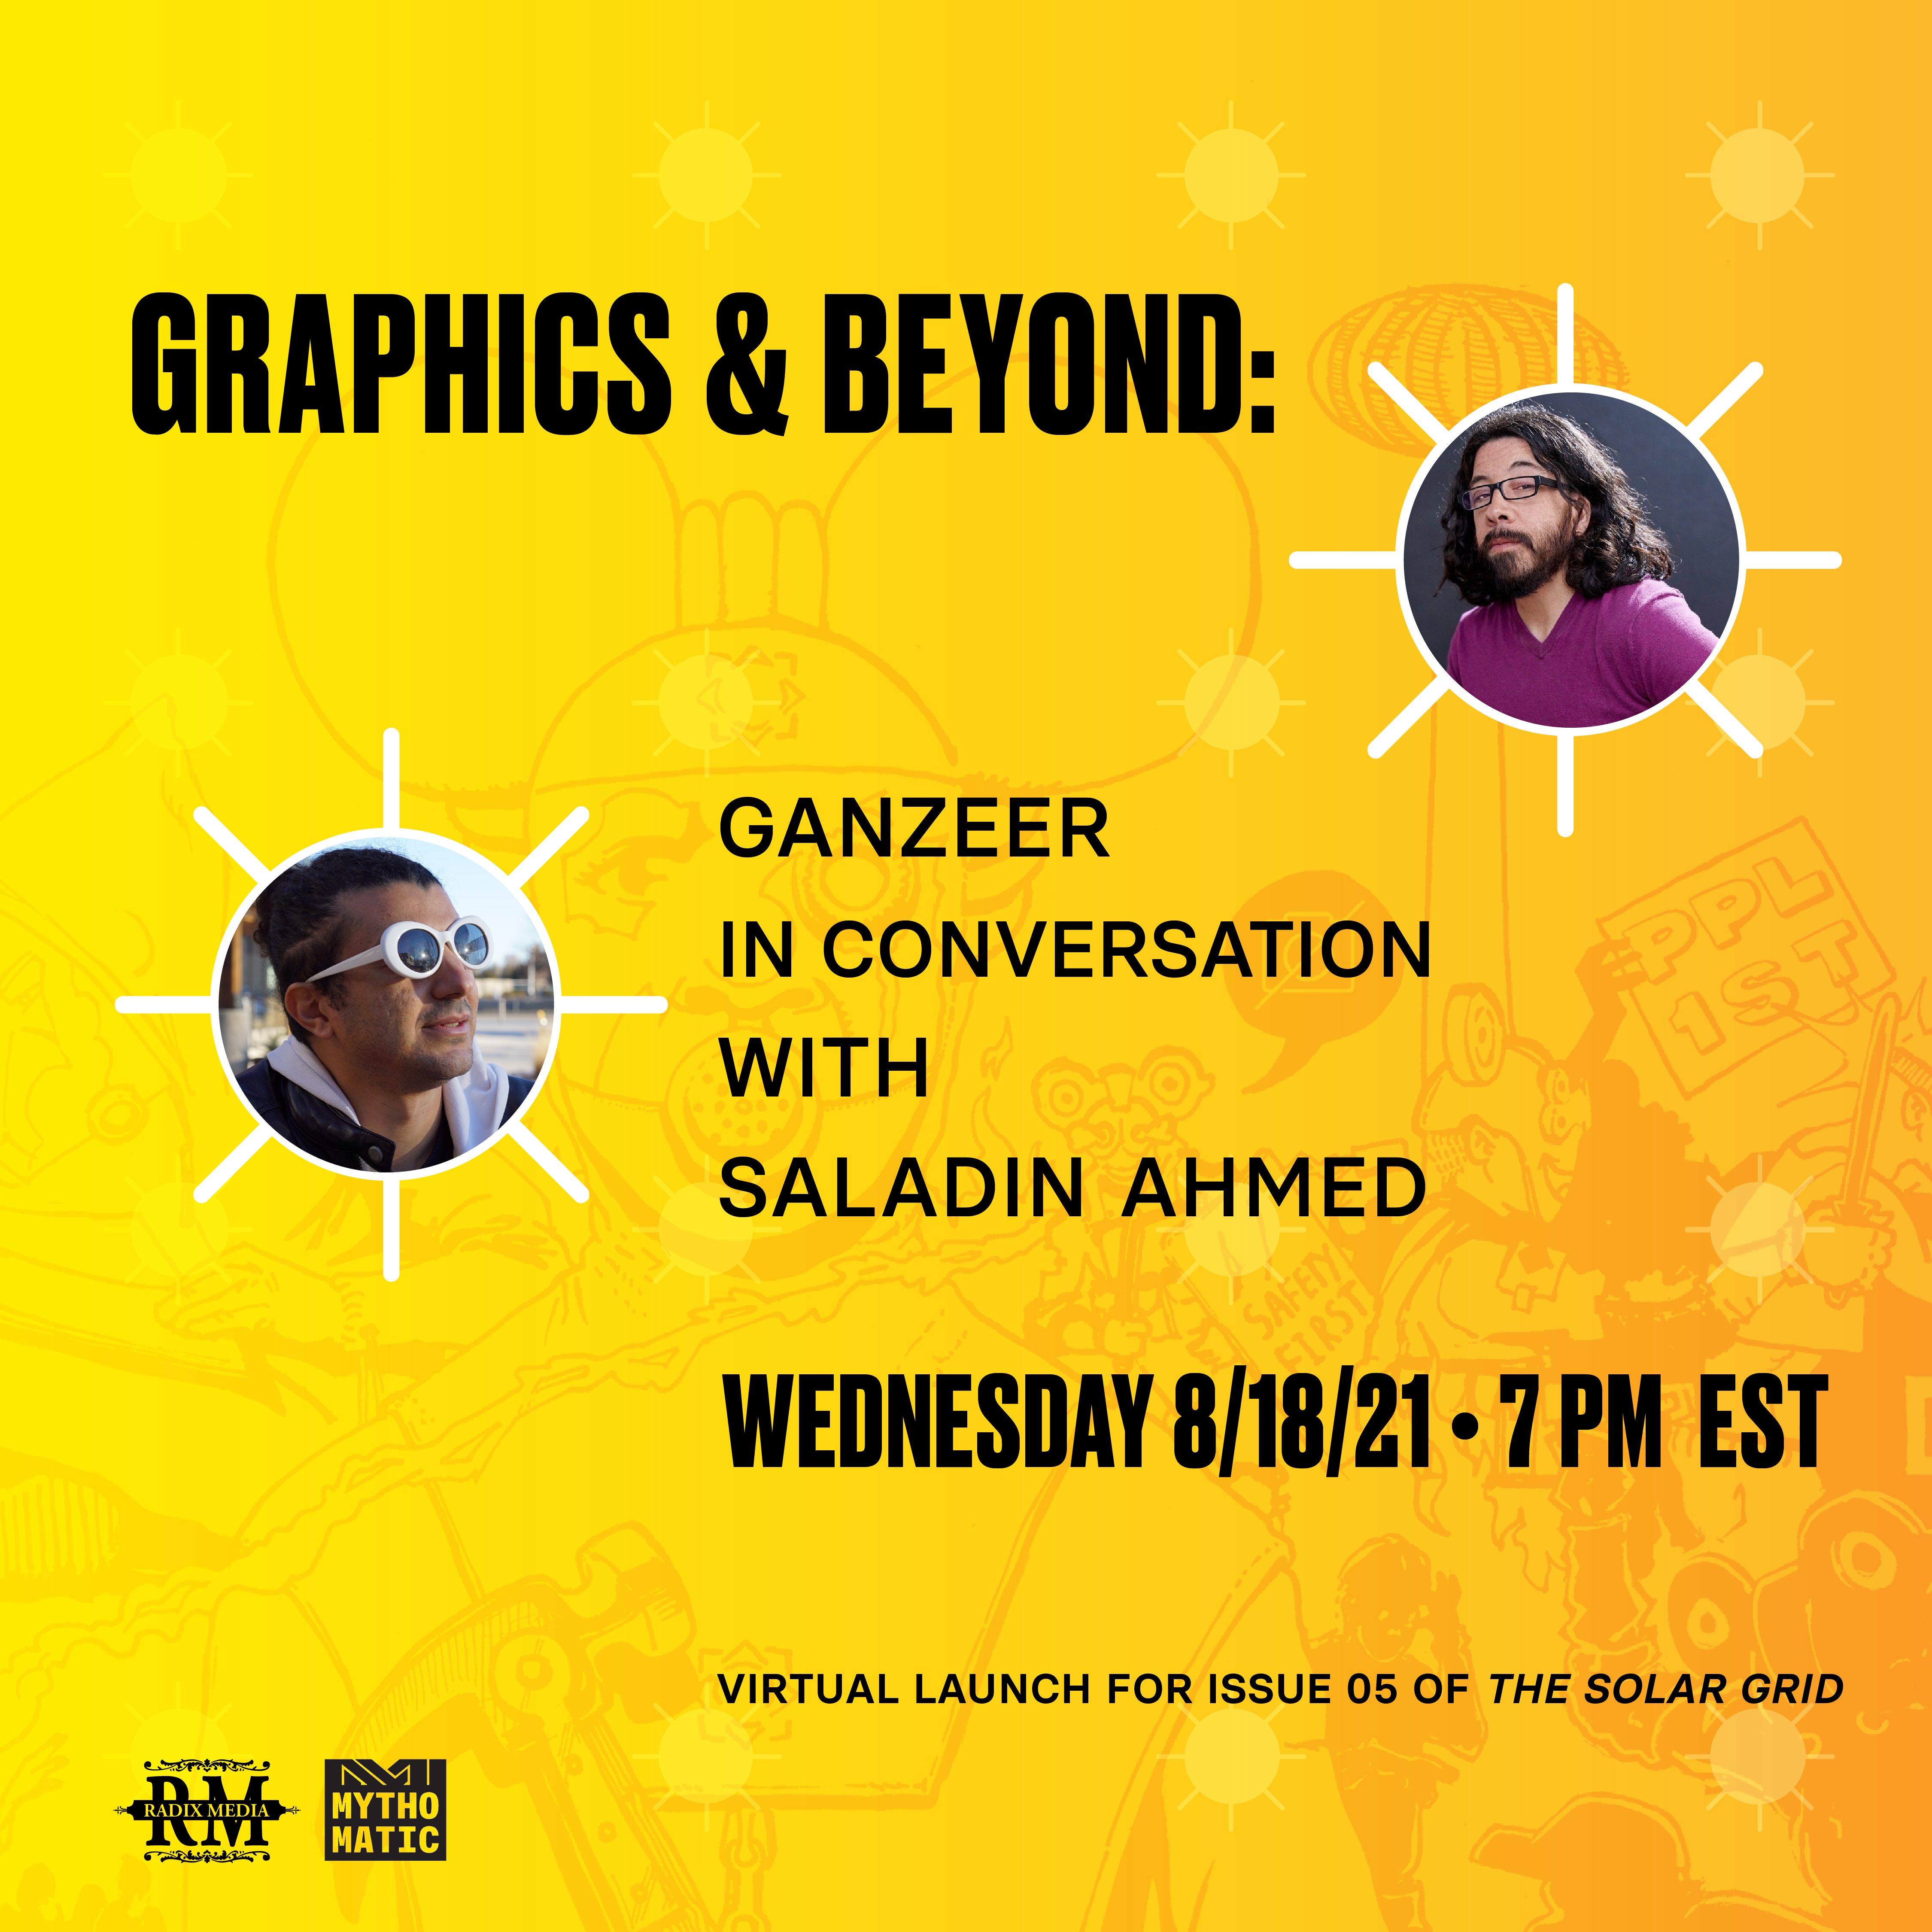 Graphics & Beyond: Ganzeer in Conversation with Saladin Ahmed